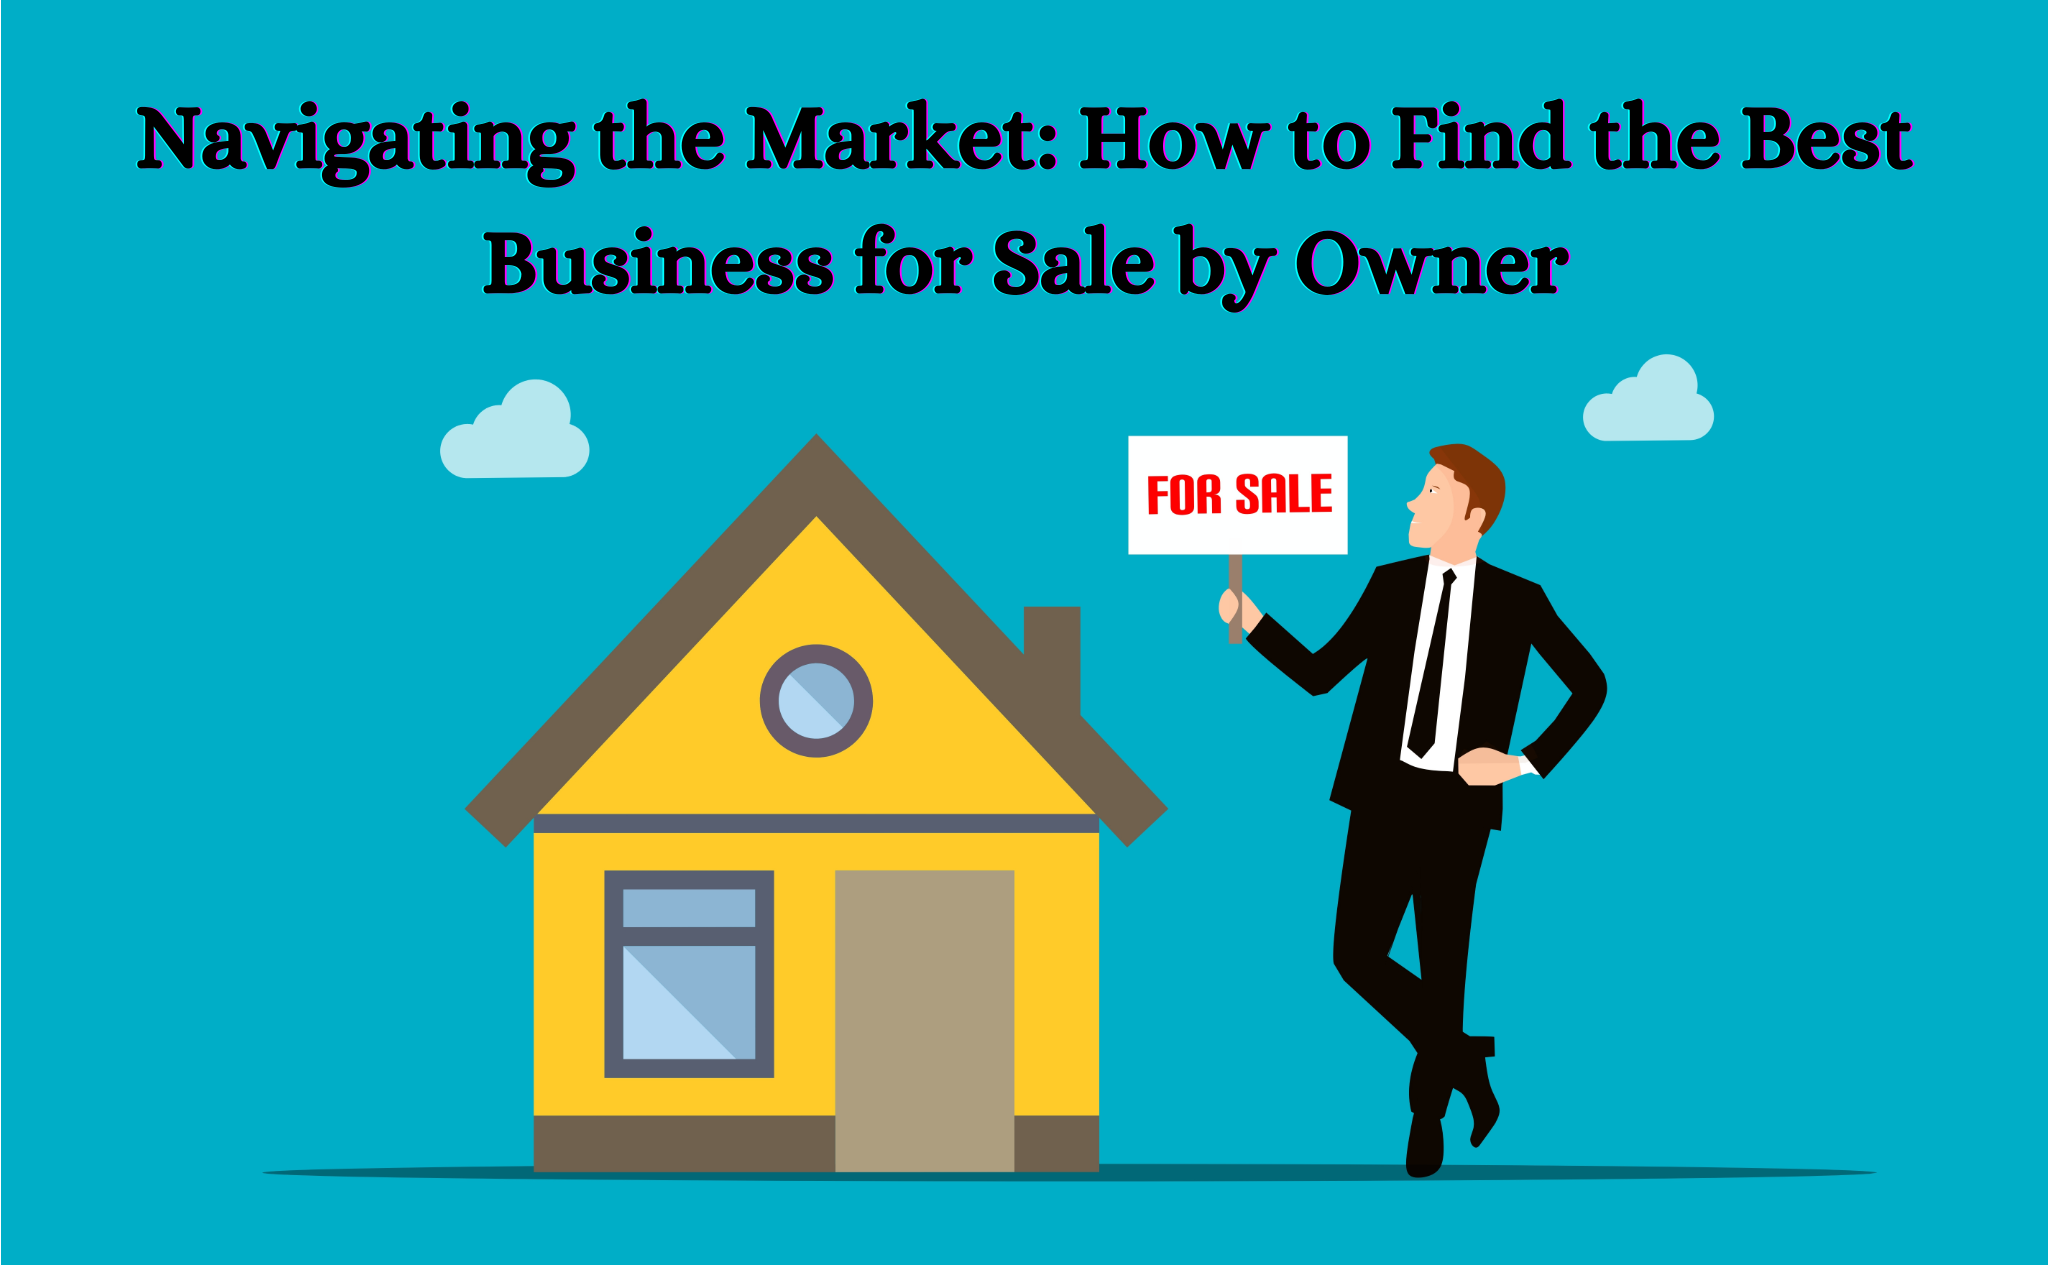 Navigating the Market: How to Find the Best Business for Sale by Owner